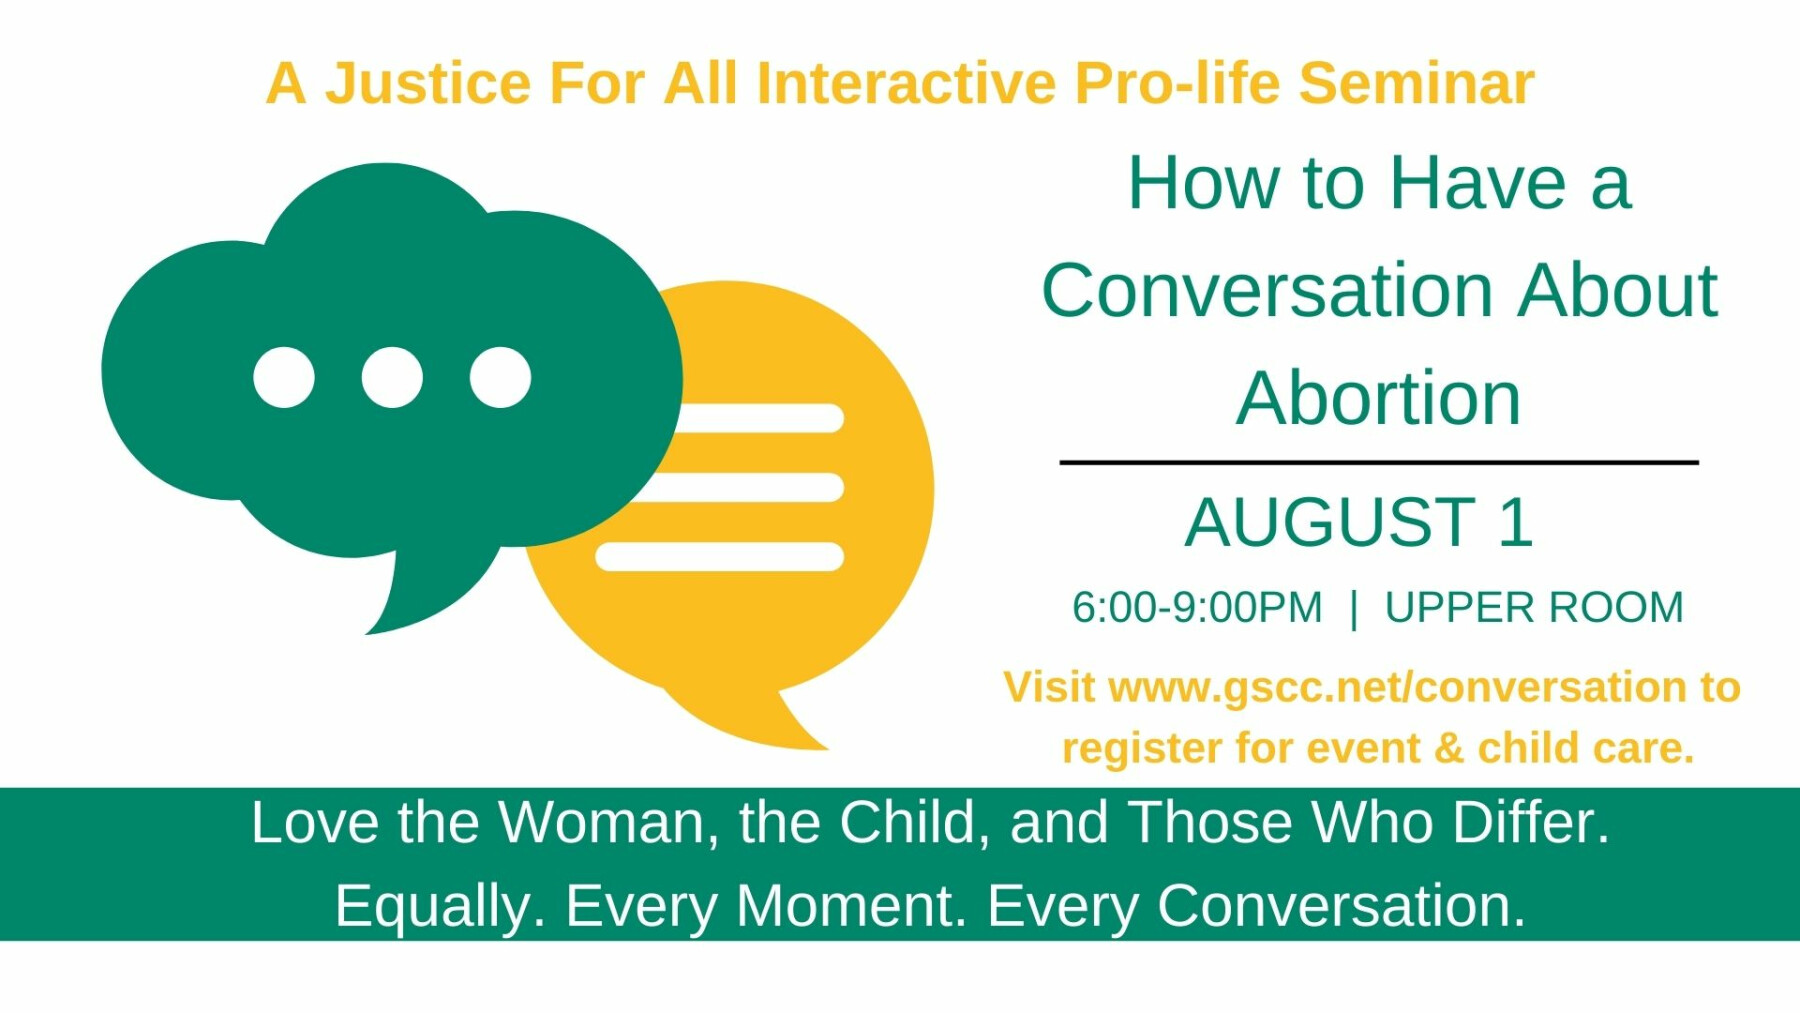 How to Have a Conversation About Abortion